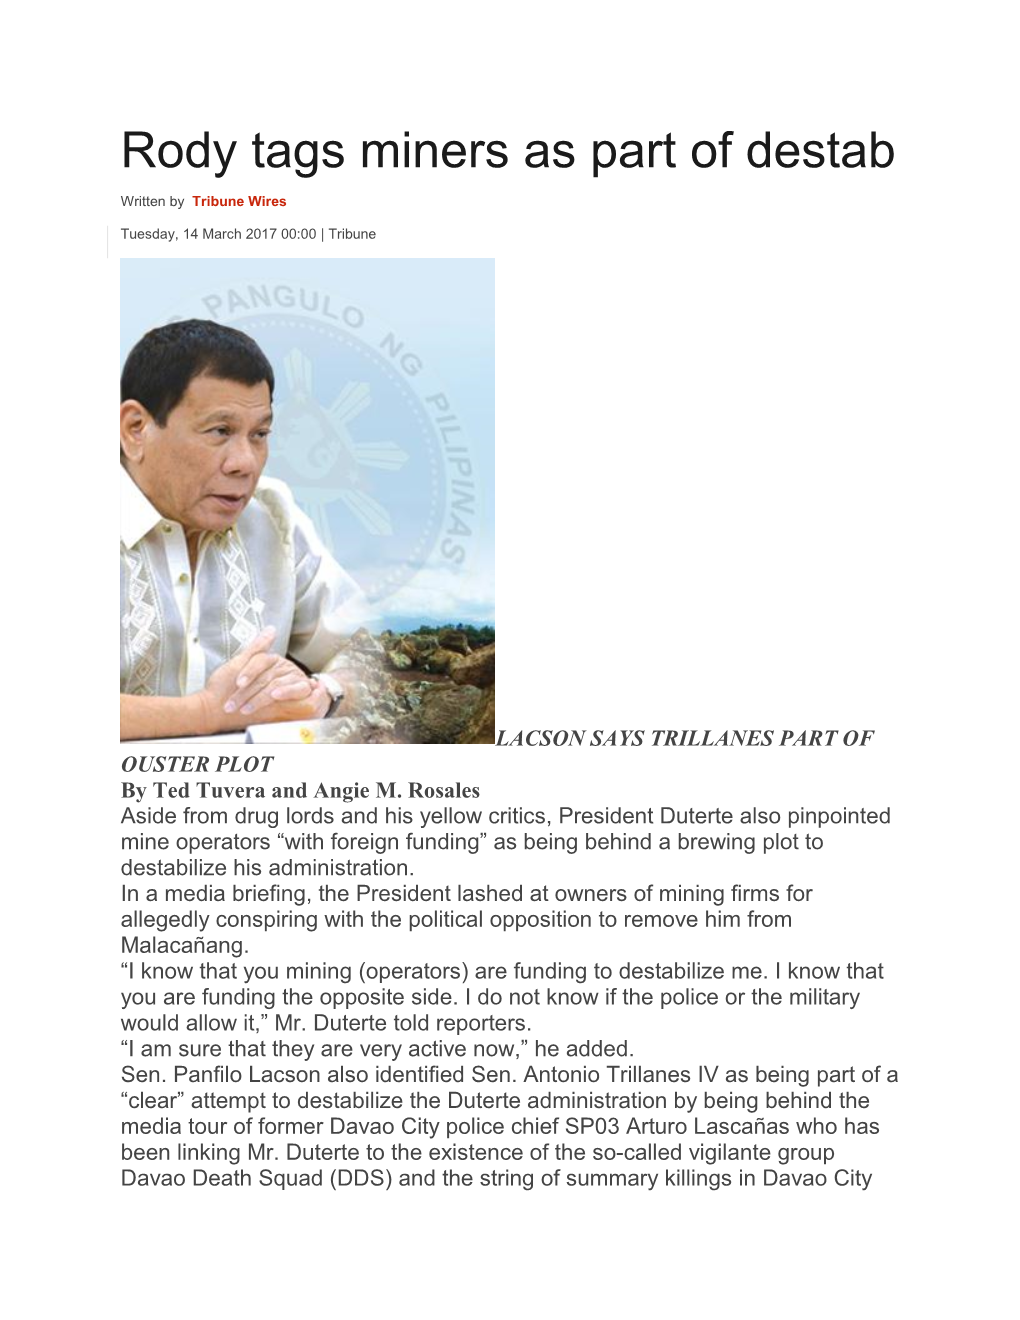 Rody Tags Miners As Part of Destab.Pdf